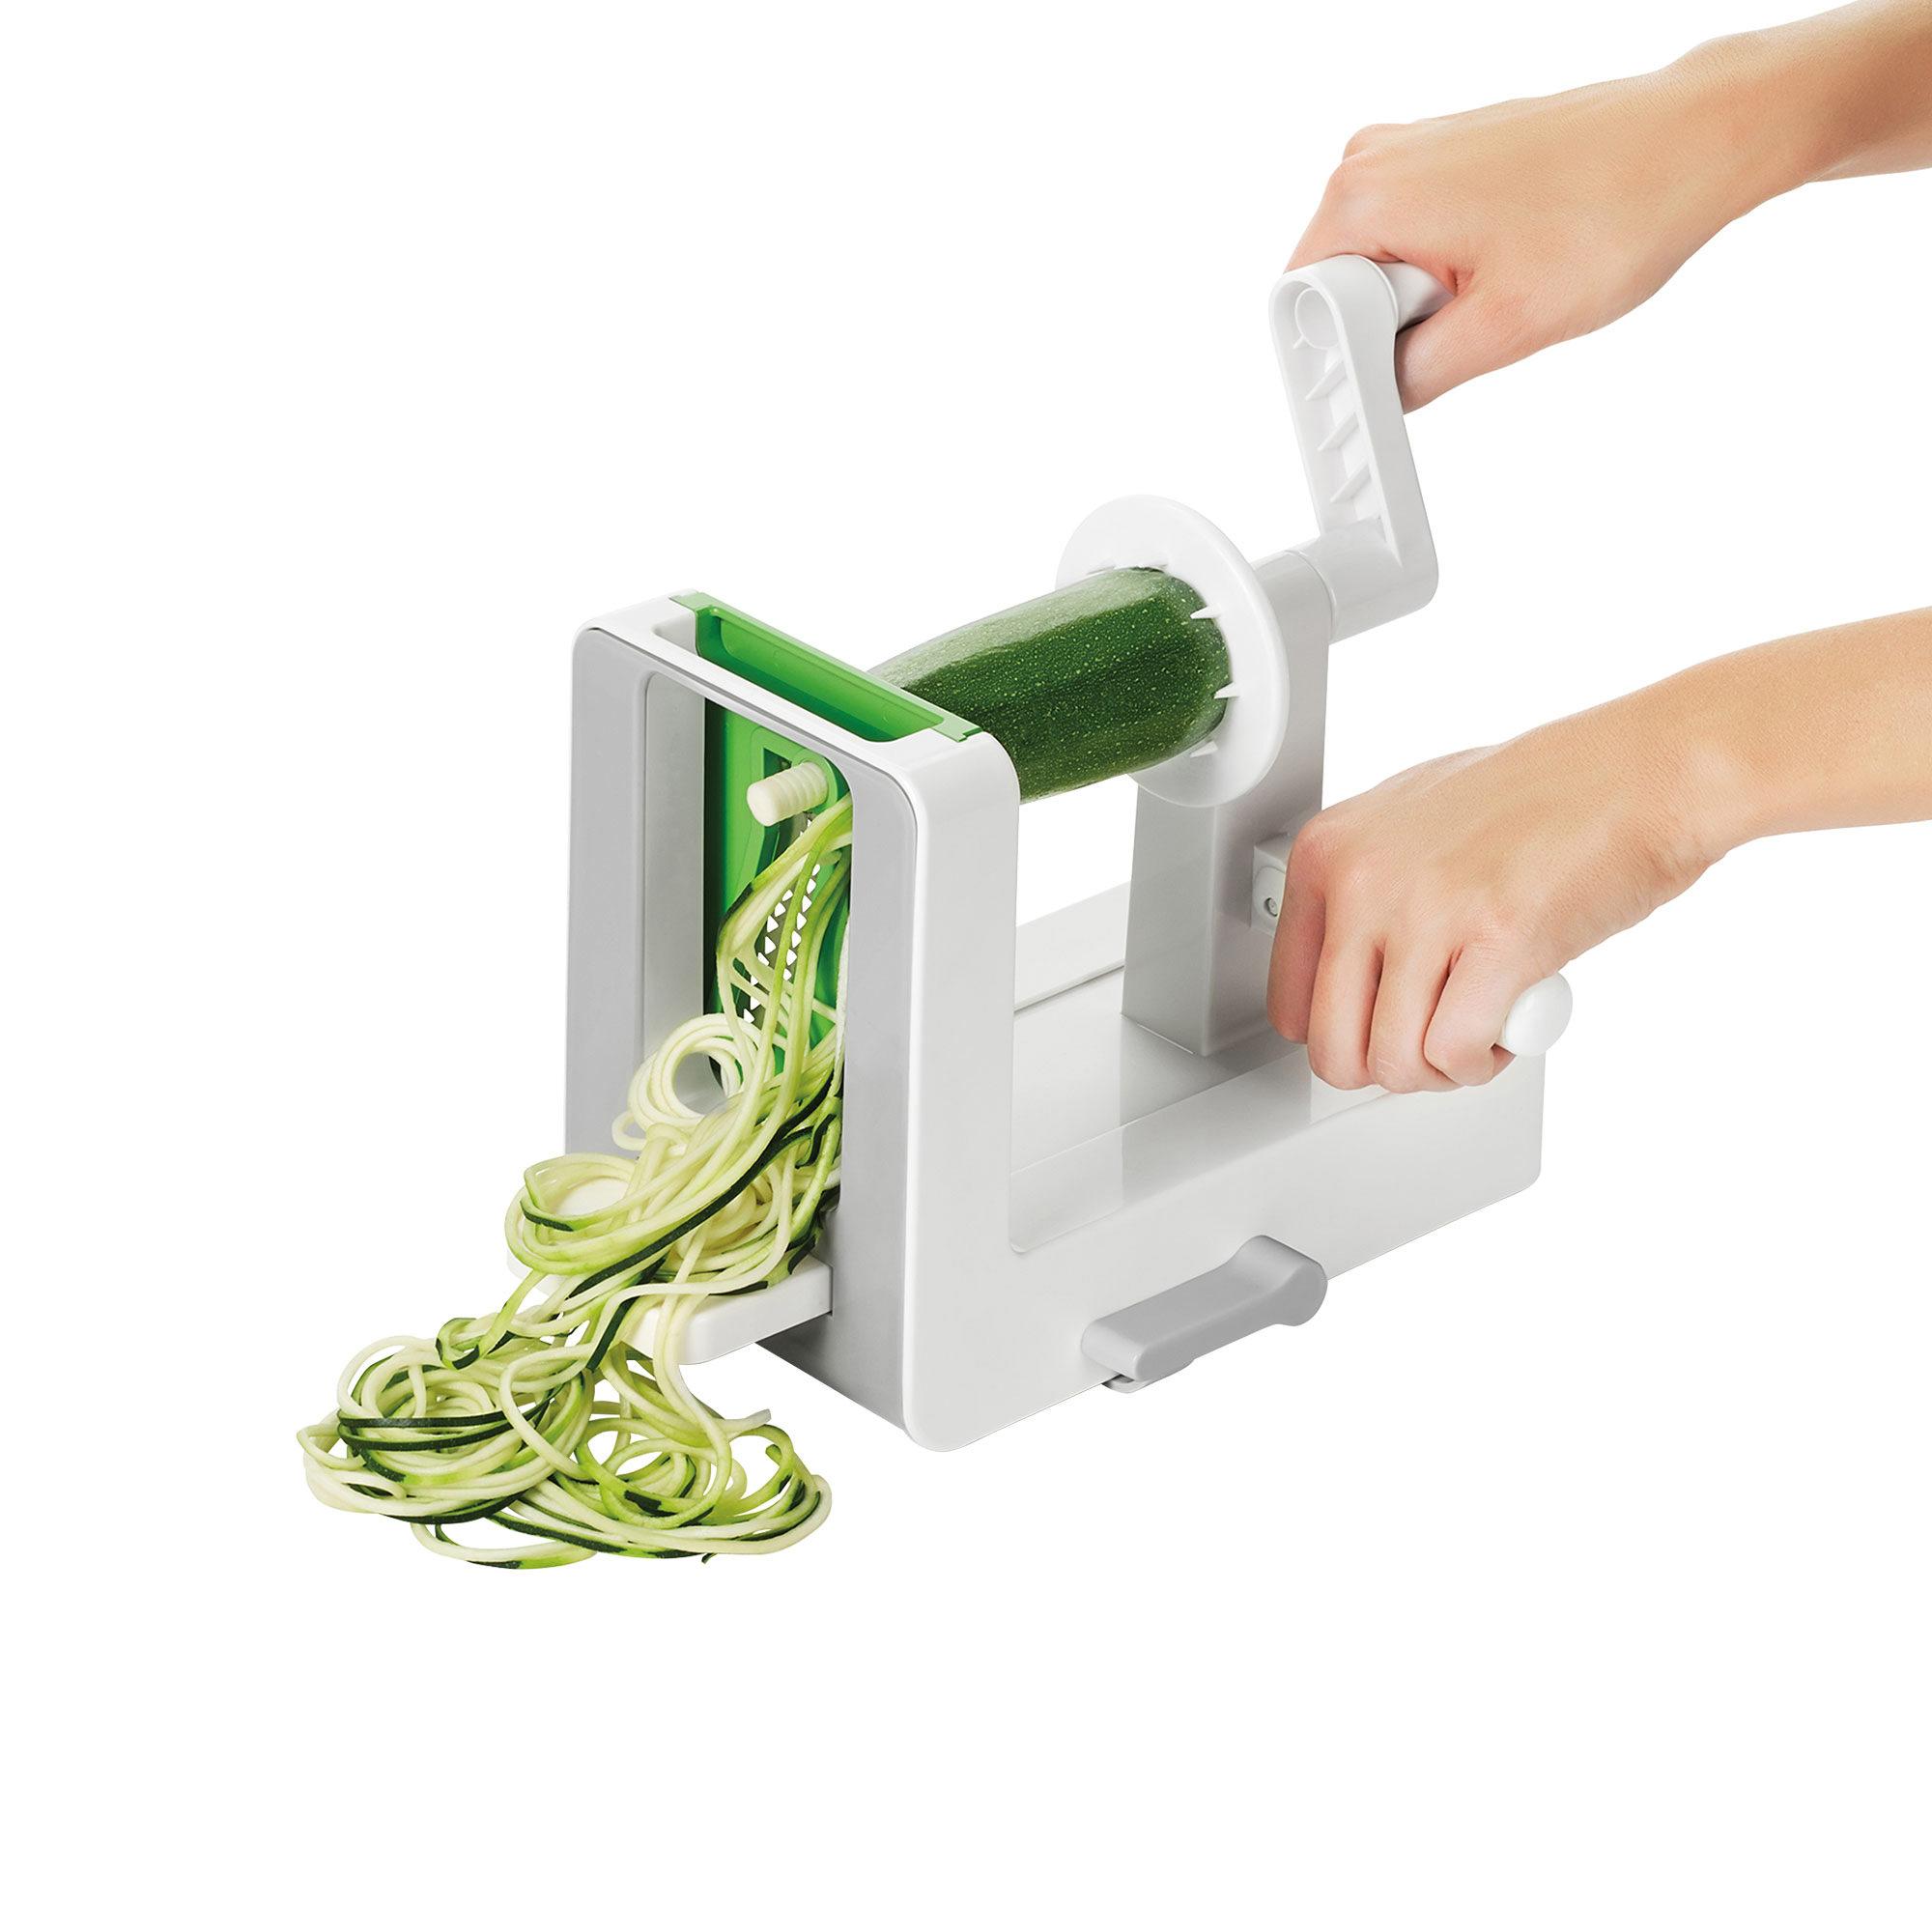 OXO Good Grips Tabletop Spiralizer Image 6